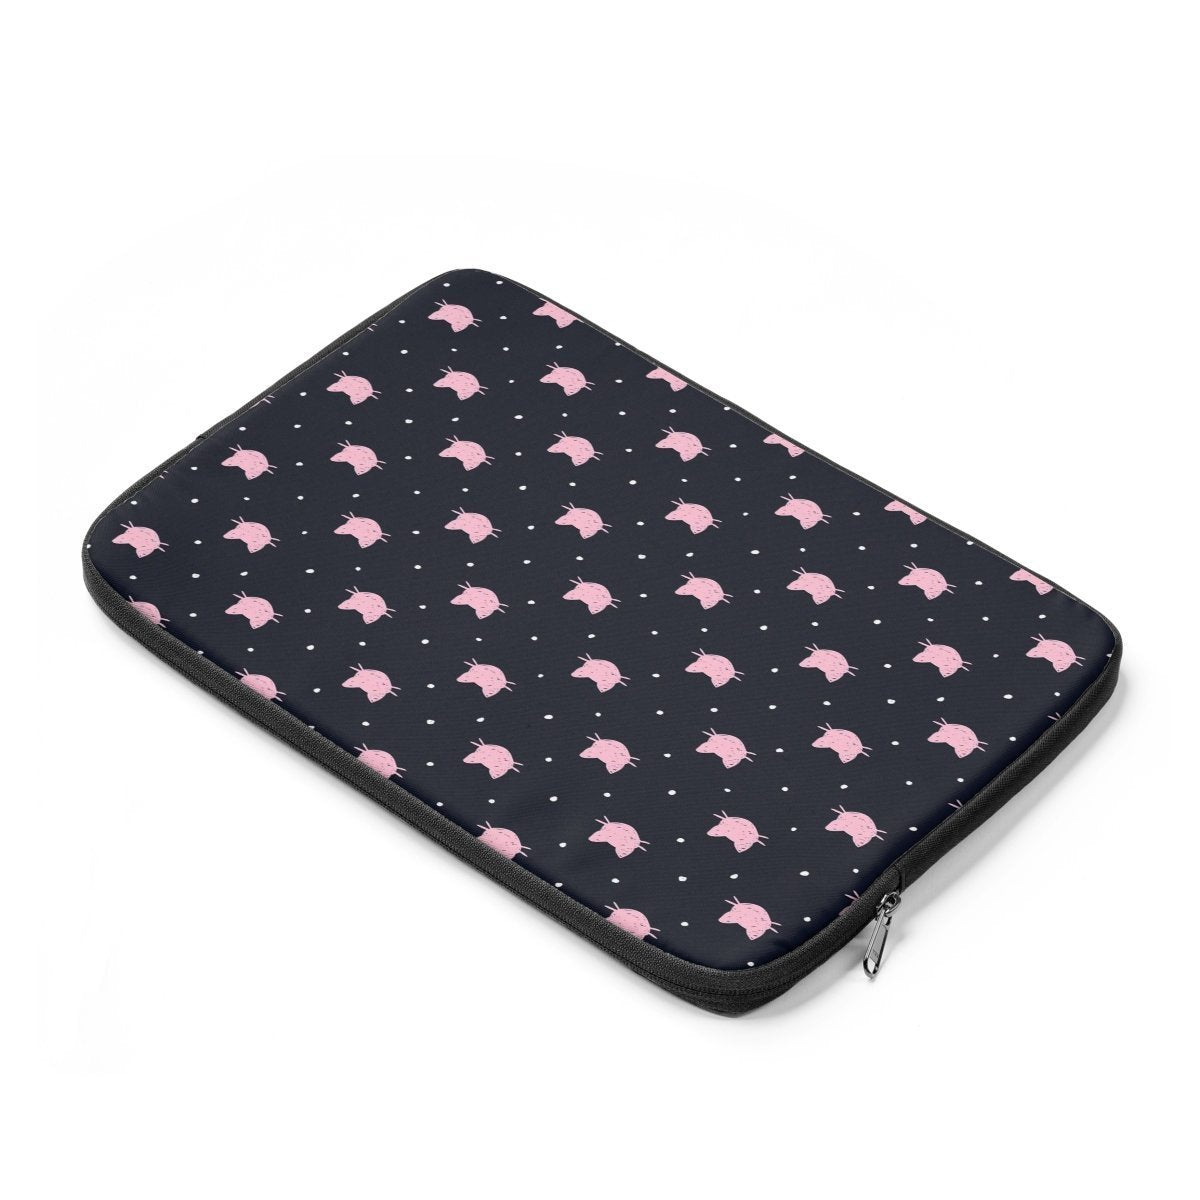 Cat Themed Accessories, Cute Cat Laptop Case with Pink Cats Printed On a Blue Fabric